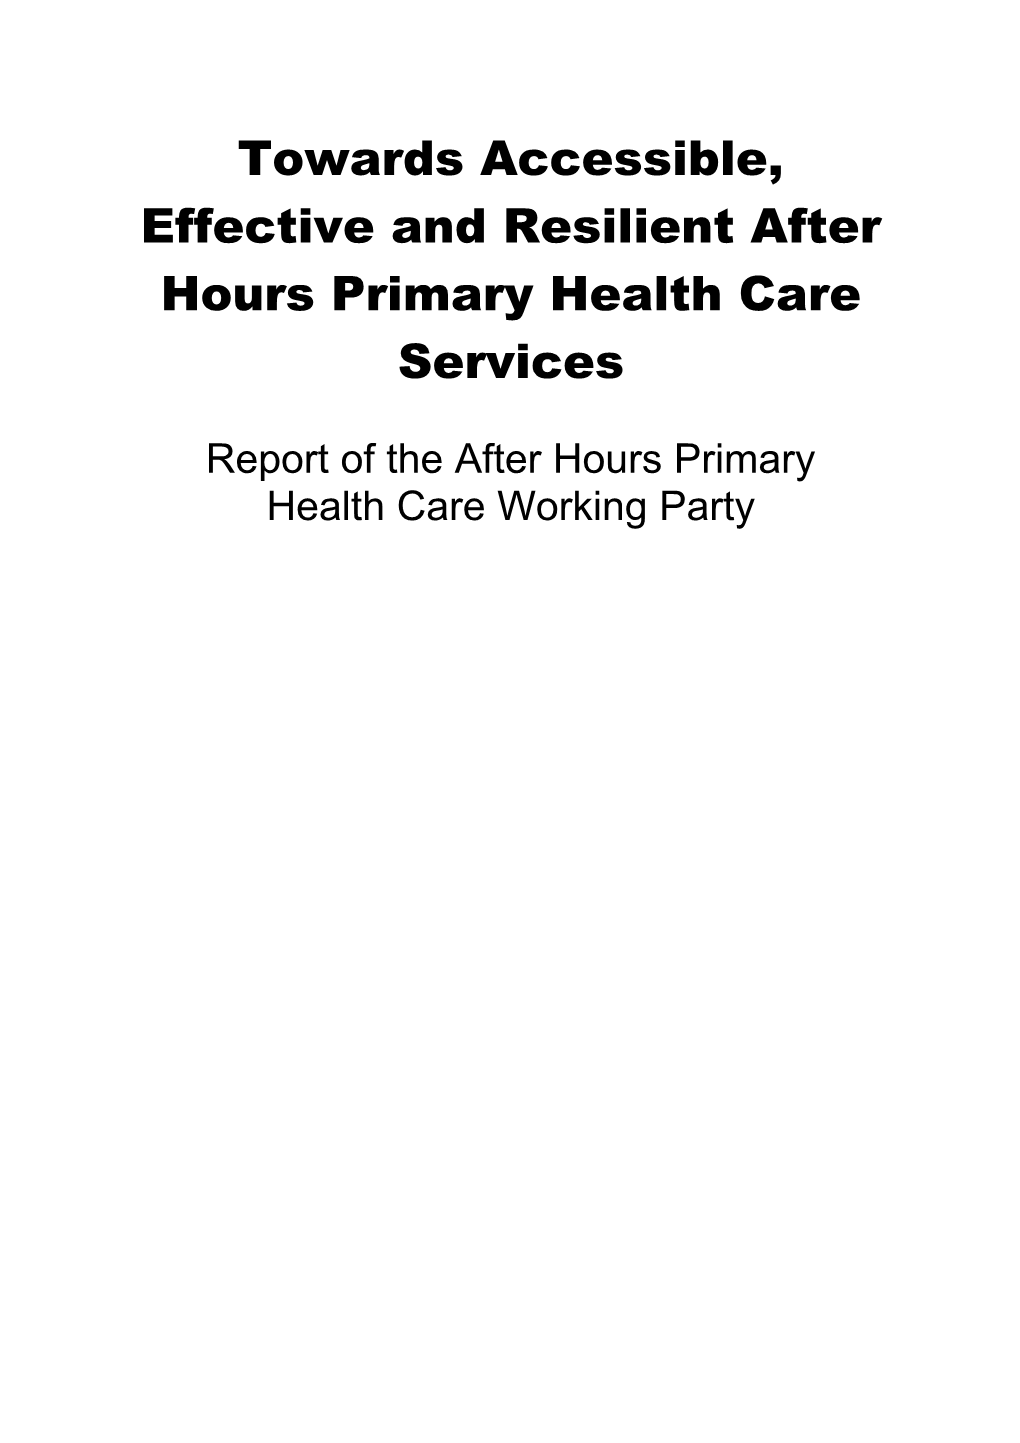 Towards Accessible, Effective and Resilient After Hours Primary Health Care Services: Report